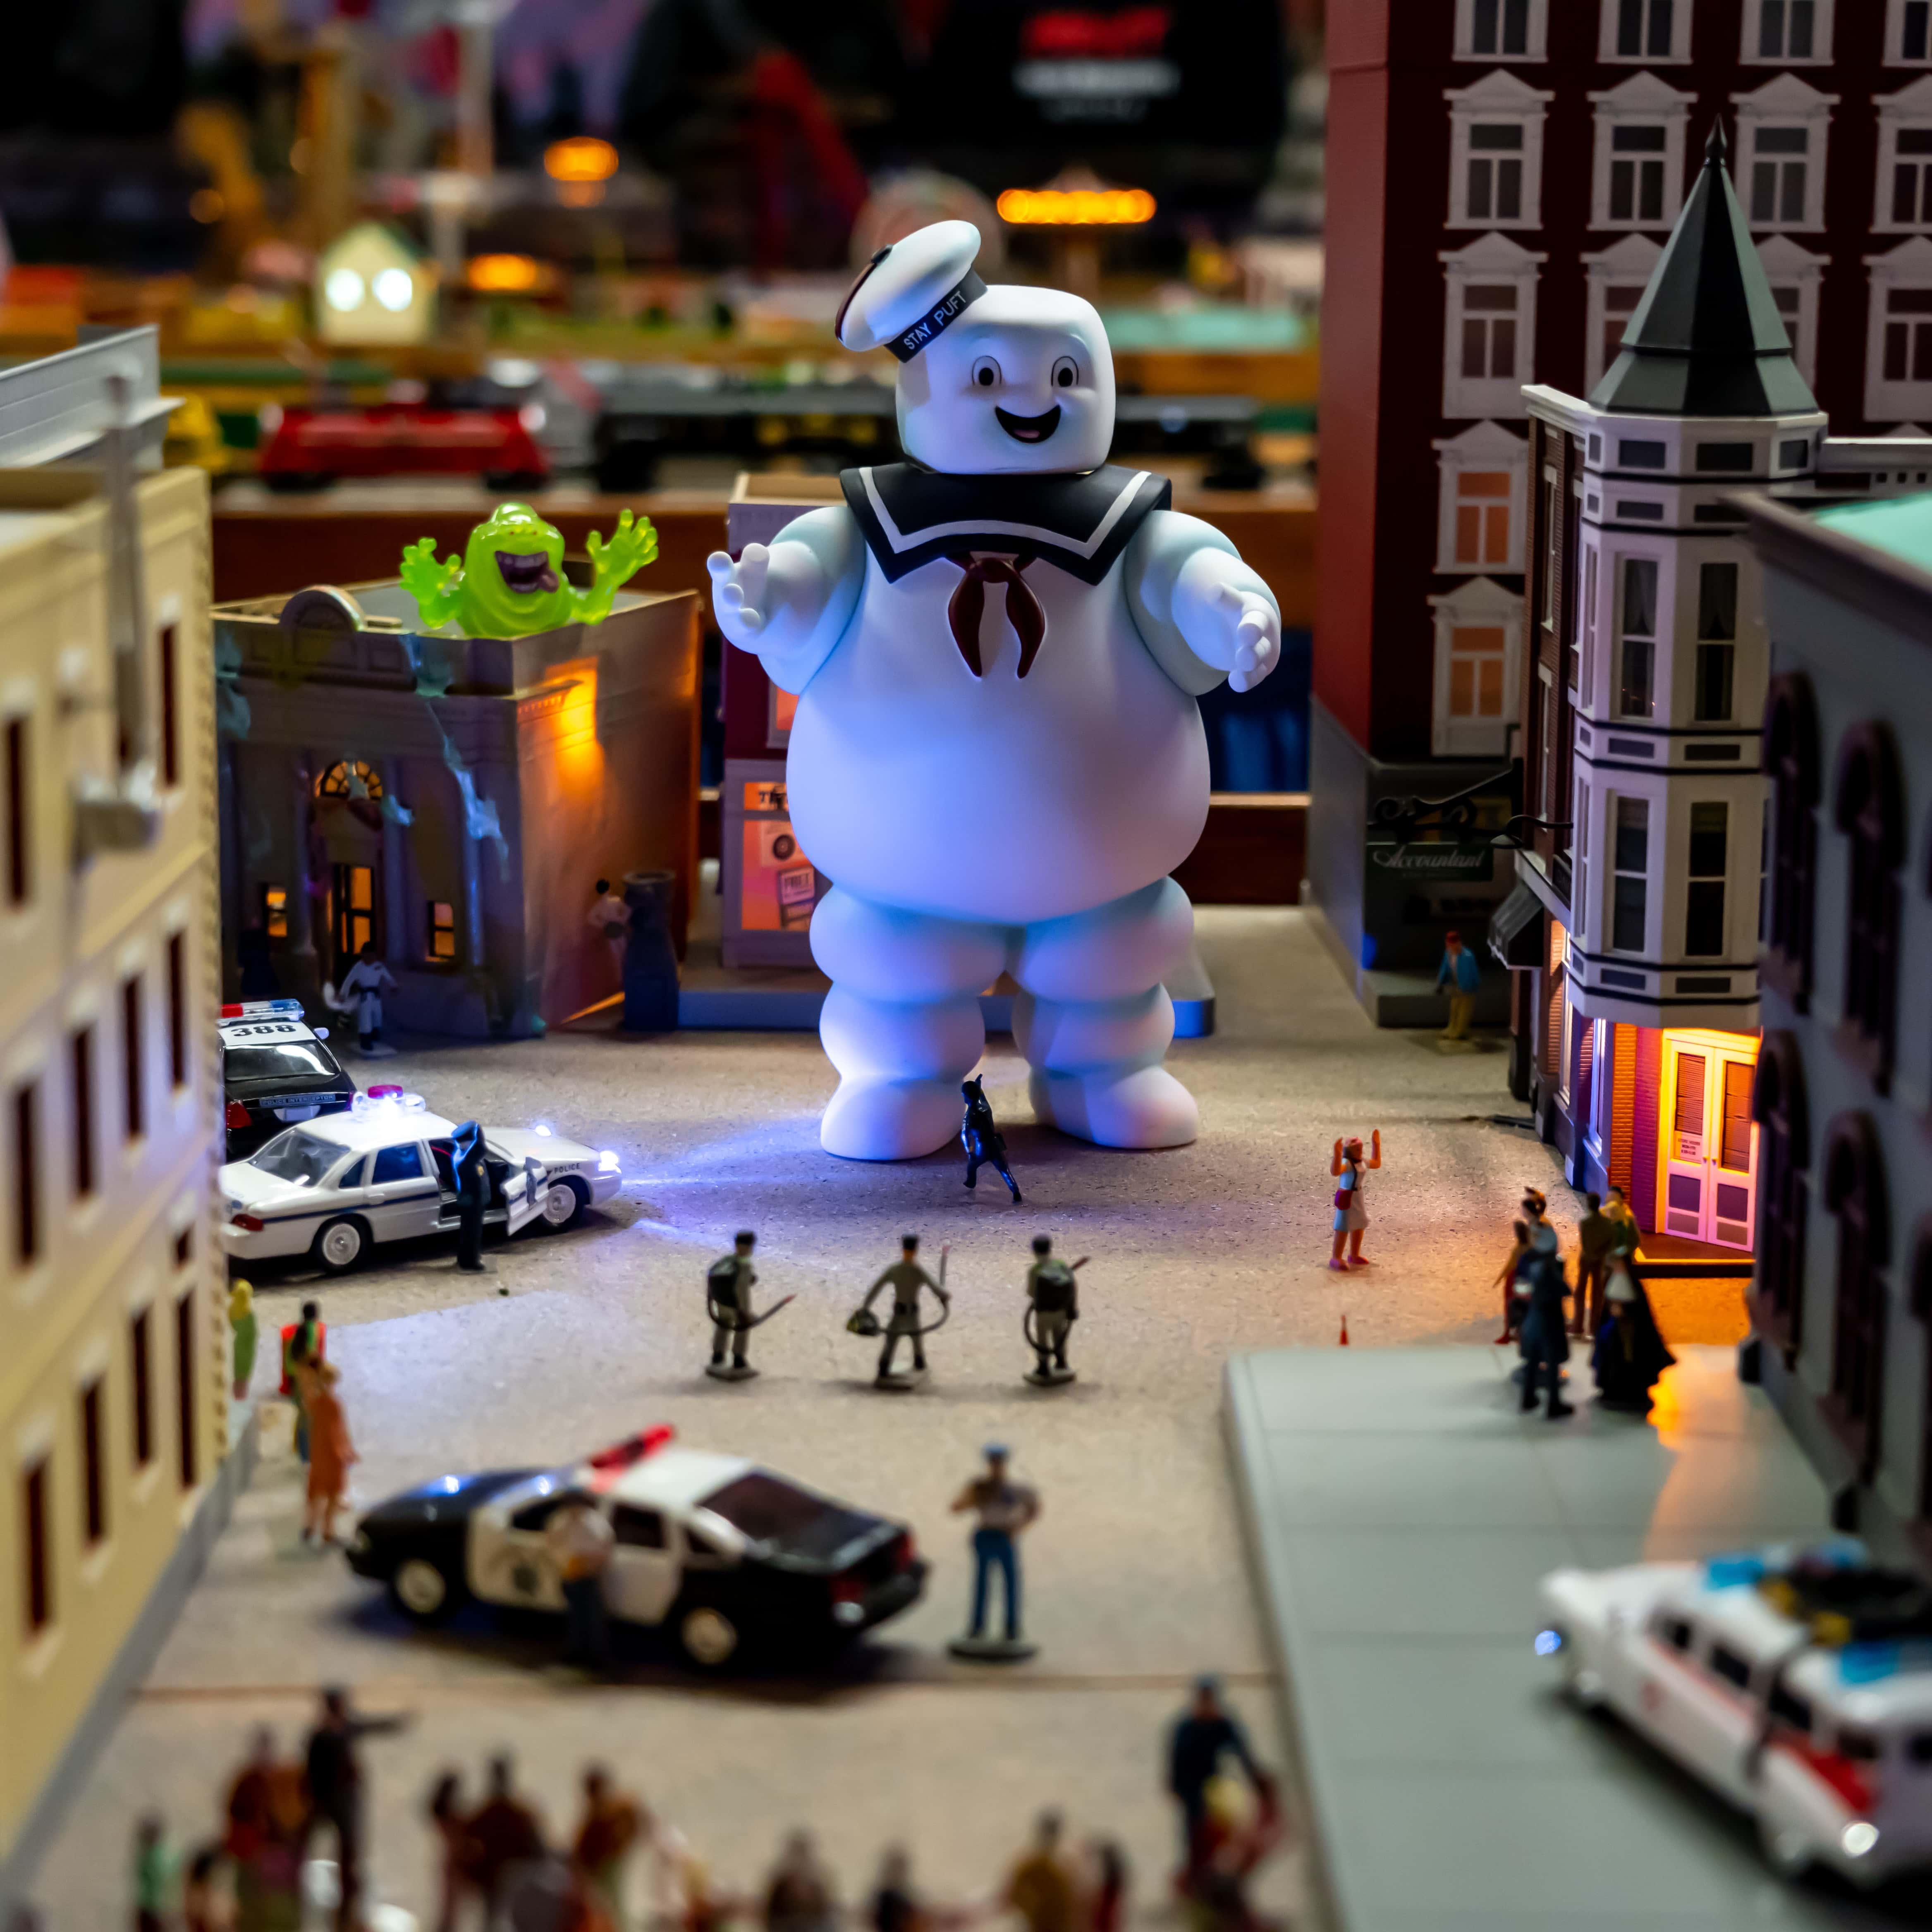 Ghostbusters Stay-Puft Marshmallow in a toy landscape